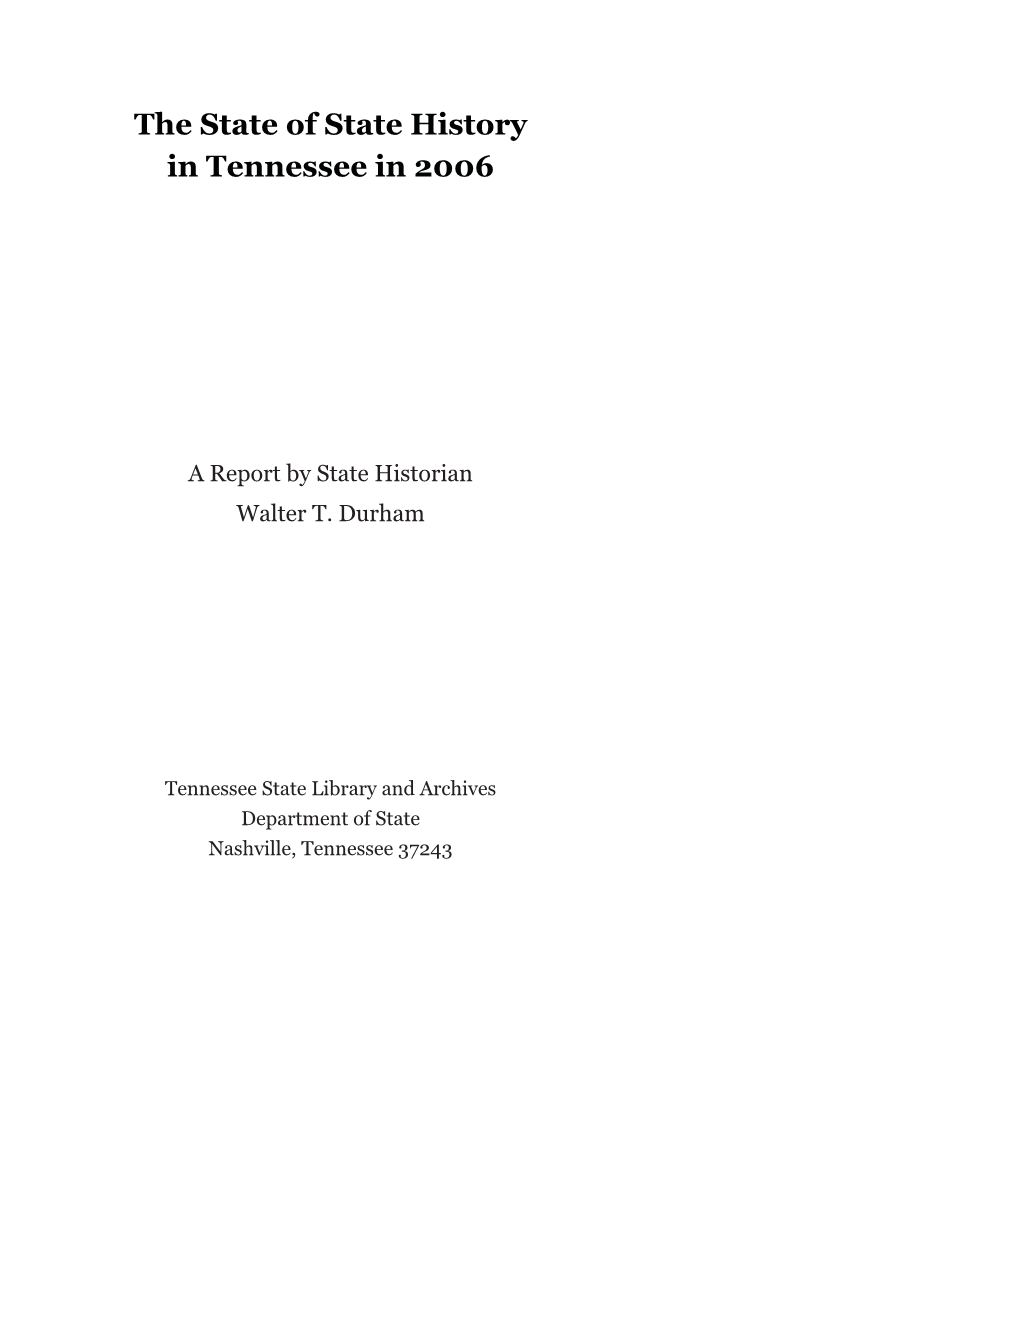 The State of State History in Tennessee in 2006